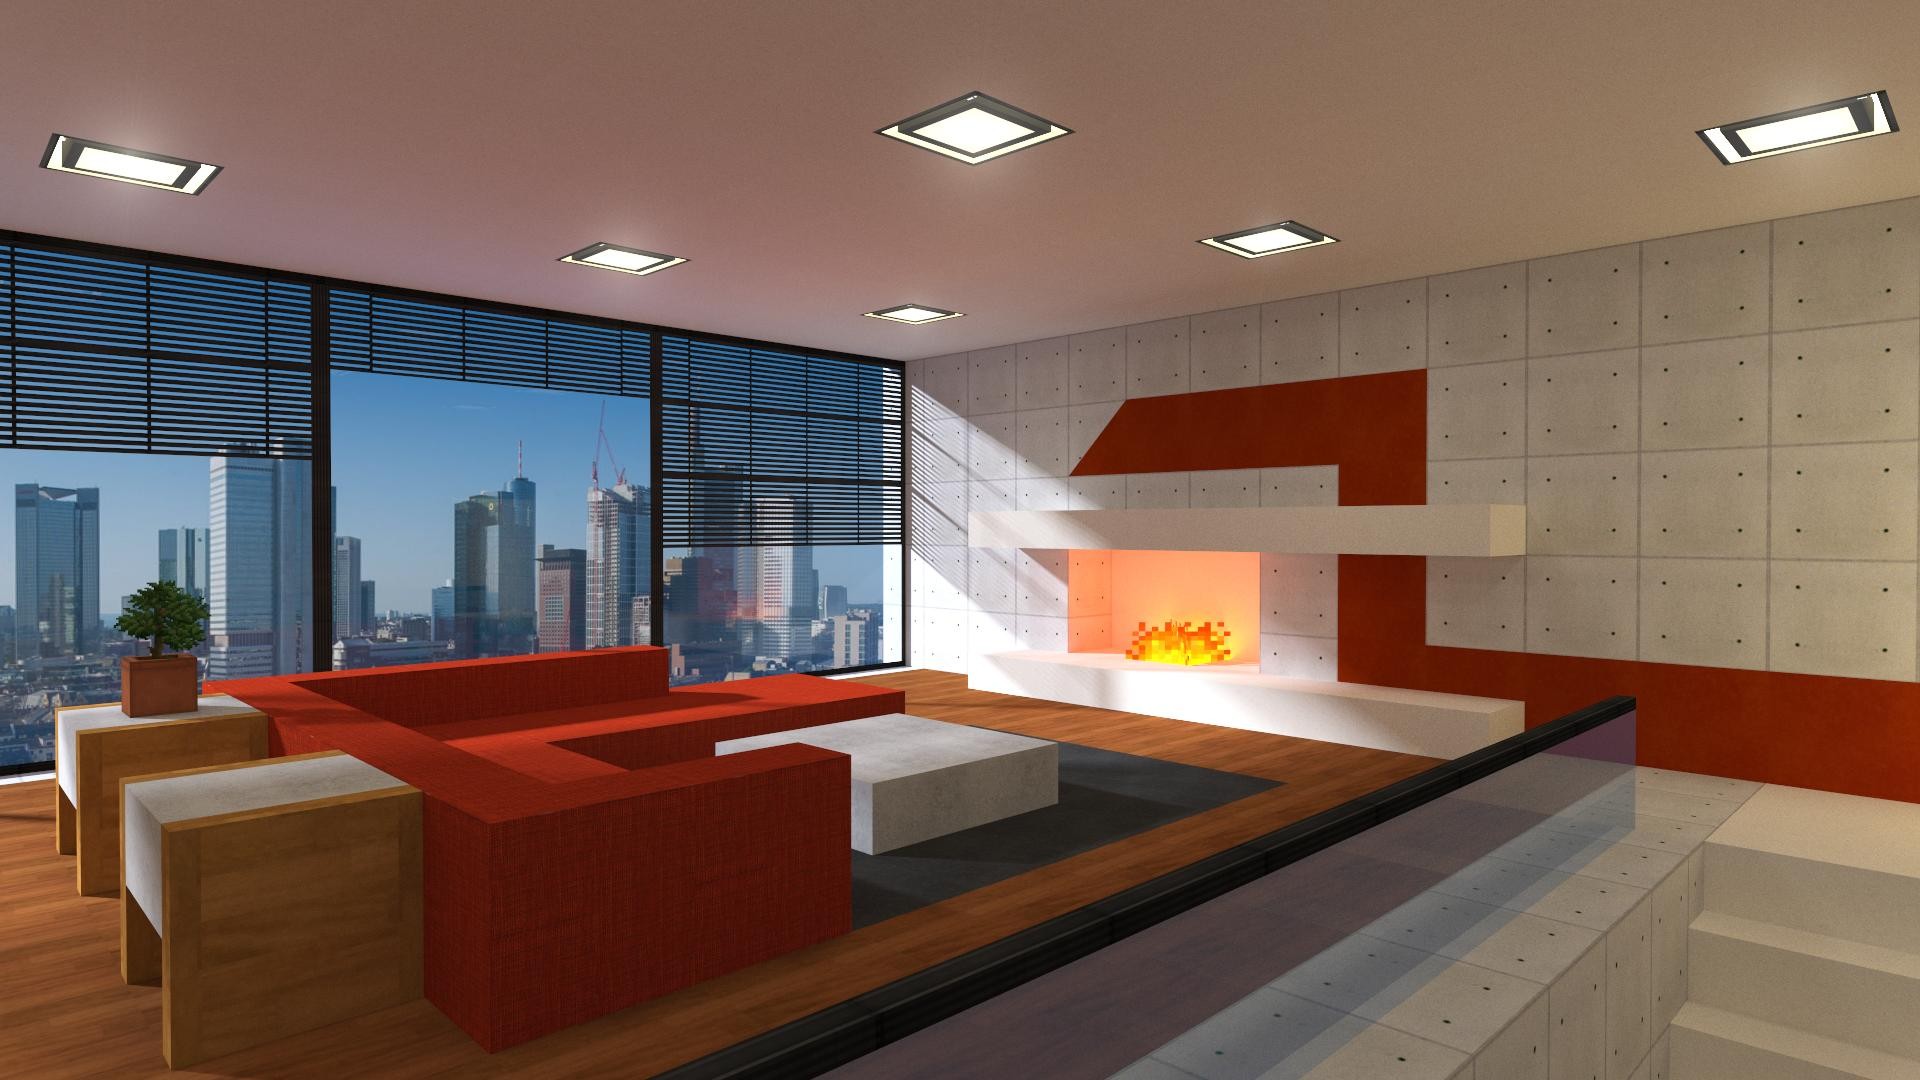 General 1920x1080 Minecraft CGI apartments fireplace window PC gaming video games screen shot